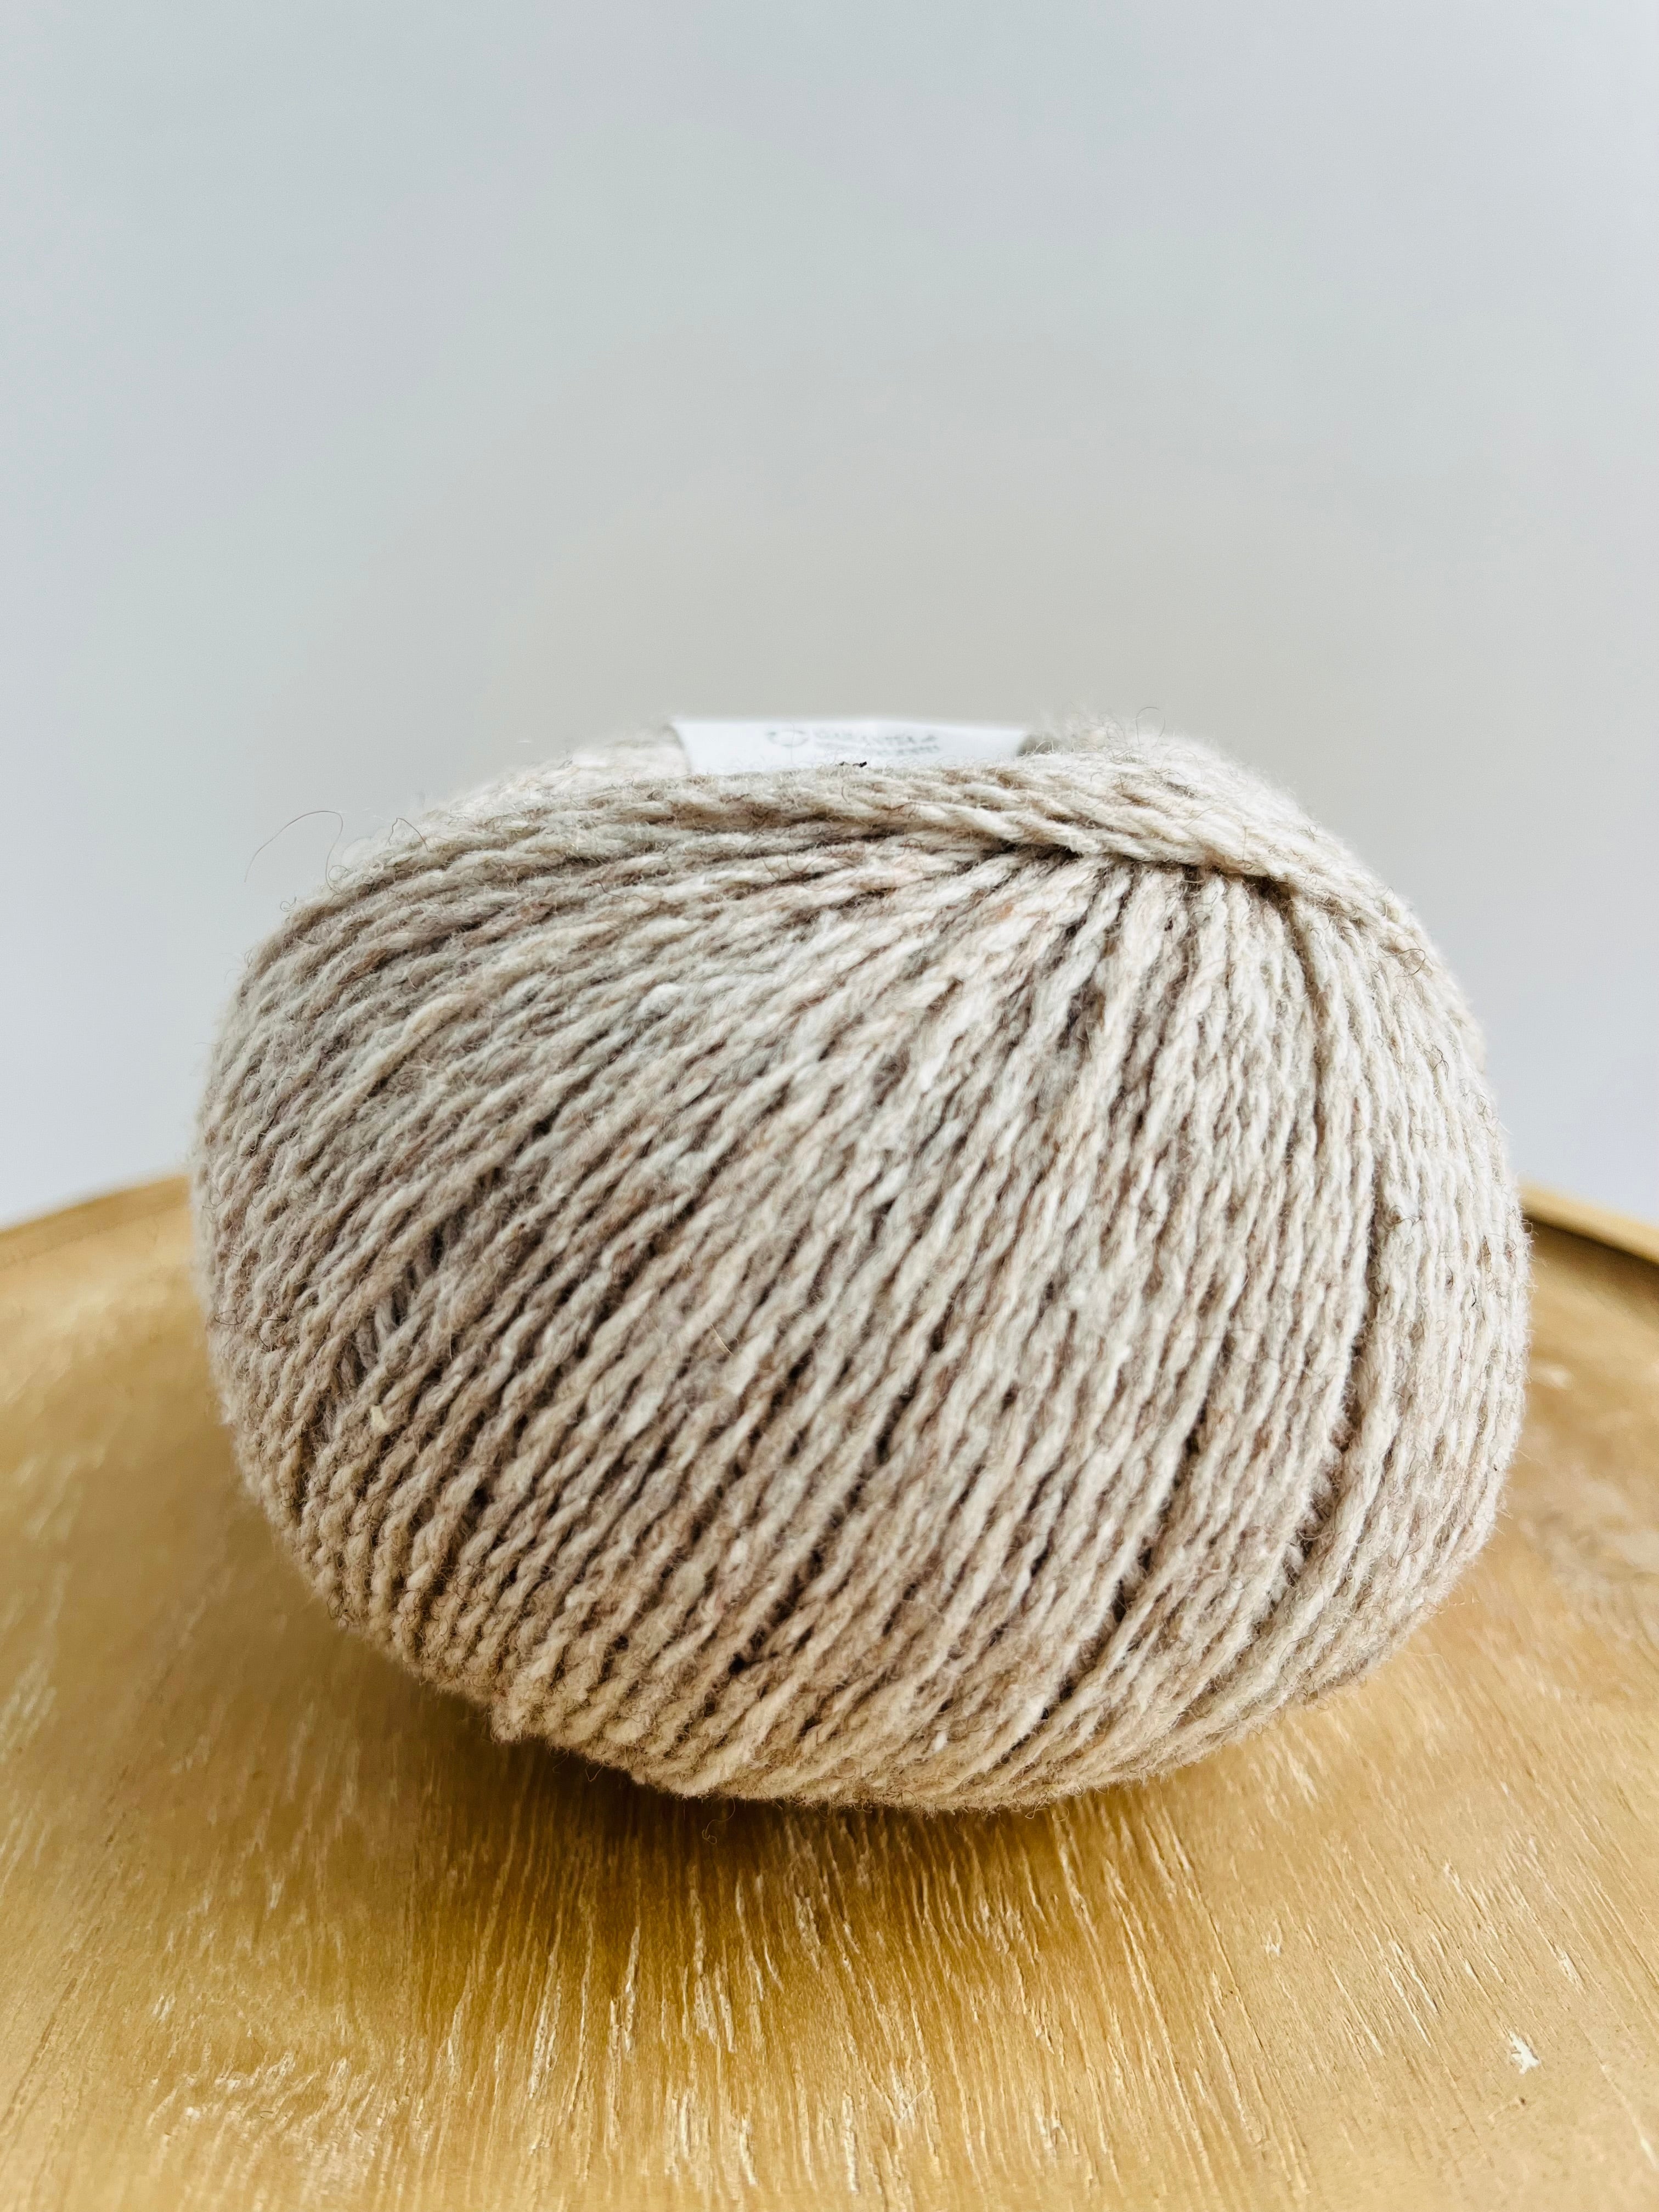 Sarichef - Saona from Wool Dreamers